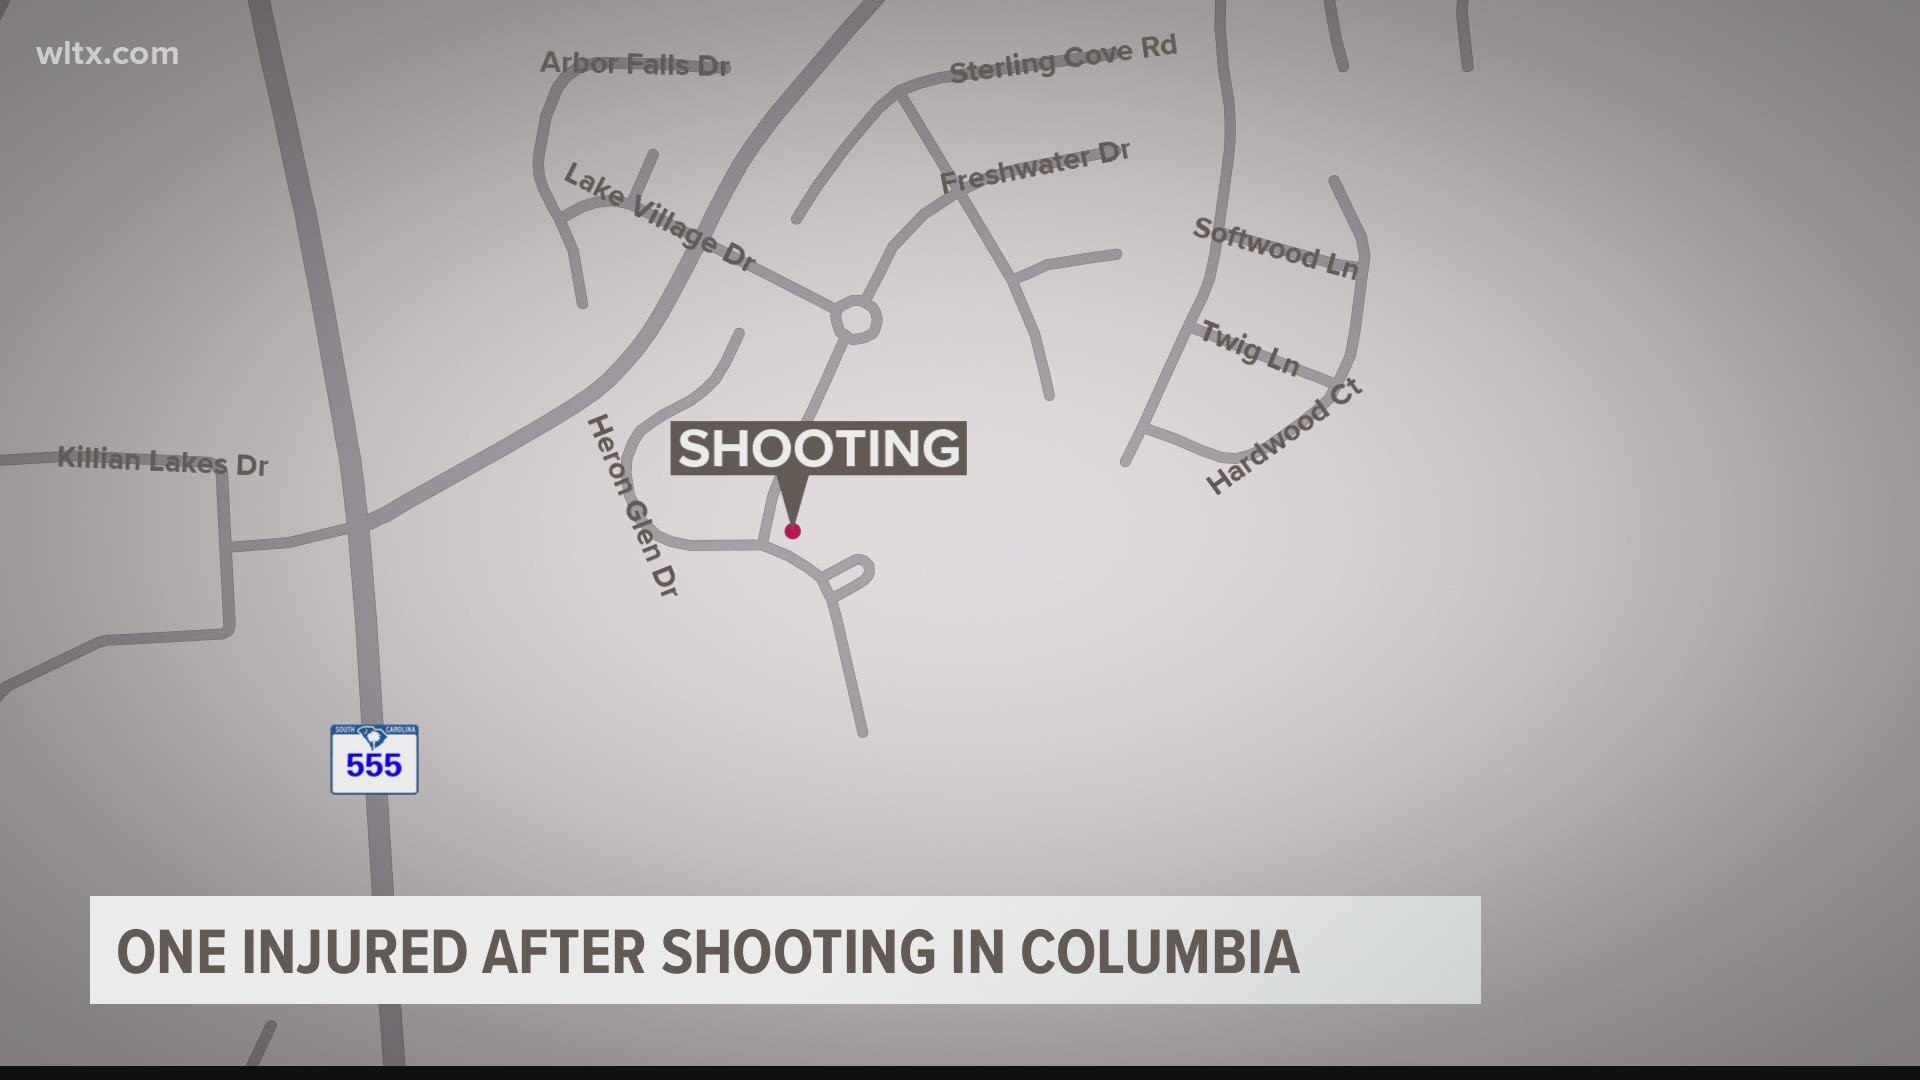 Richland Co. Deputies are investigating after a man was shot and sent to the hospital.